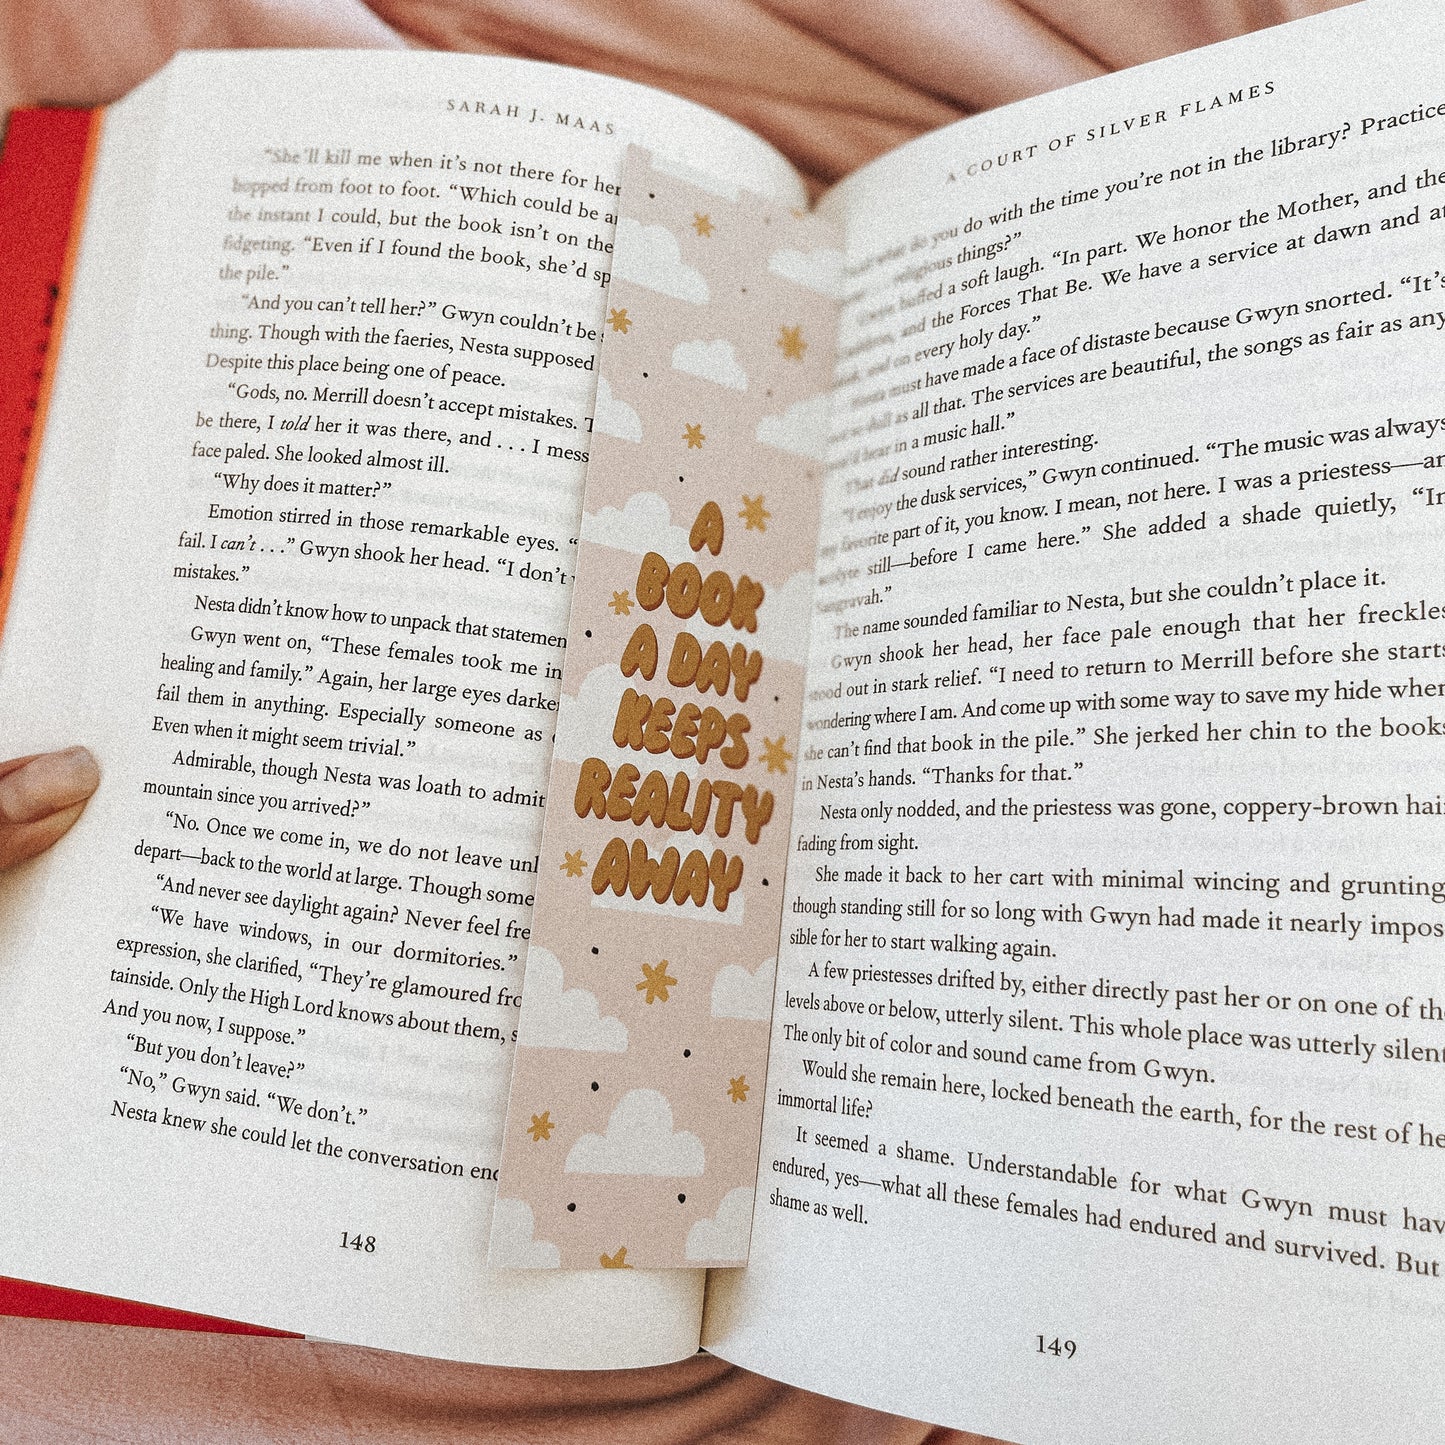 A Book A Day Keeps Reality Away Bookmark